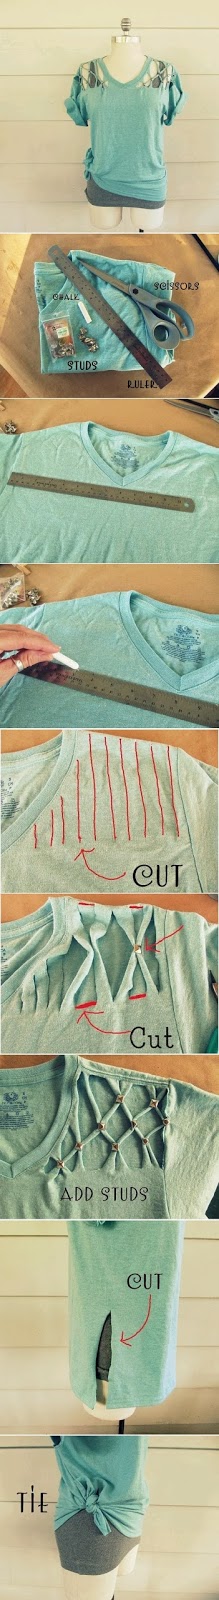 How To Make a Studded T-Shirt 